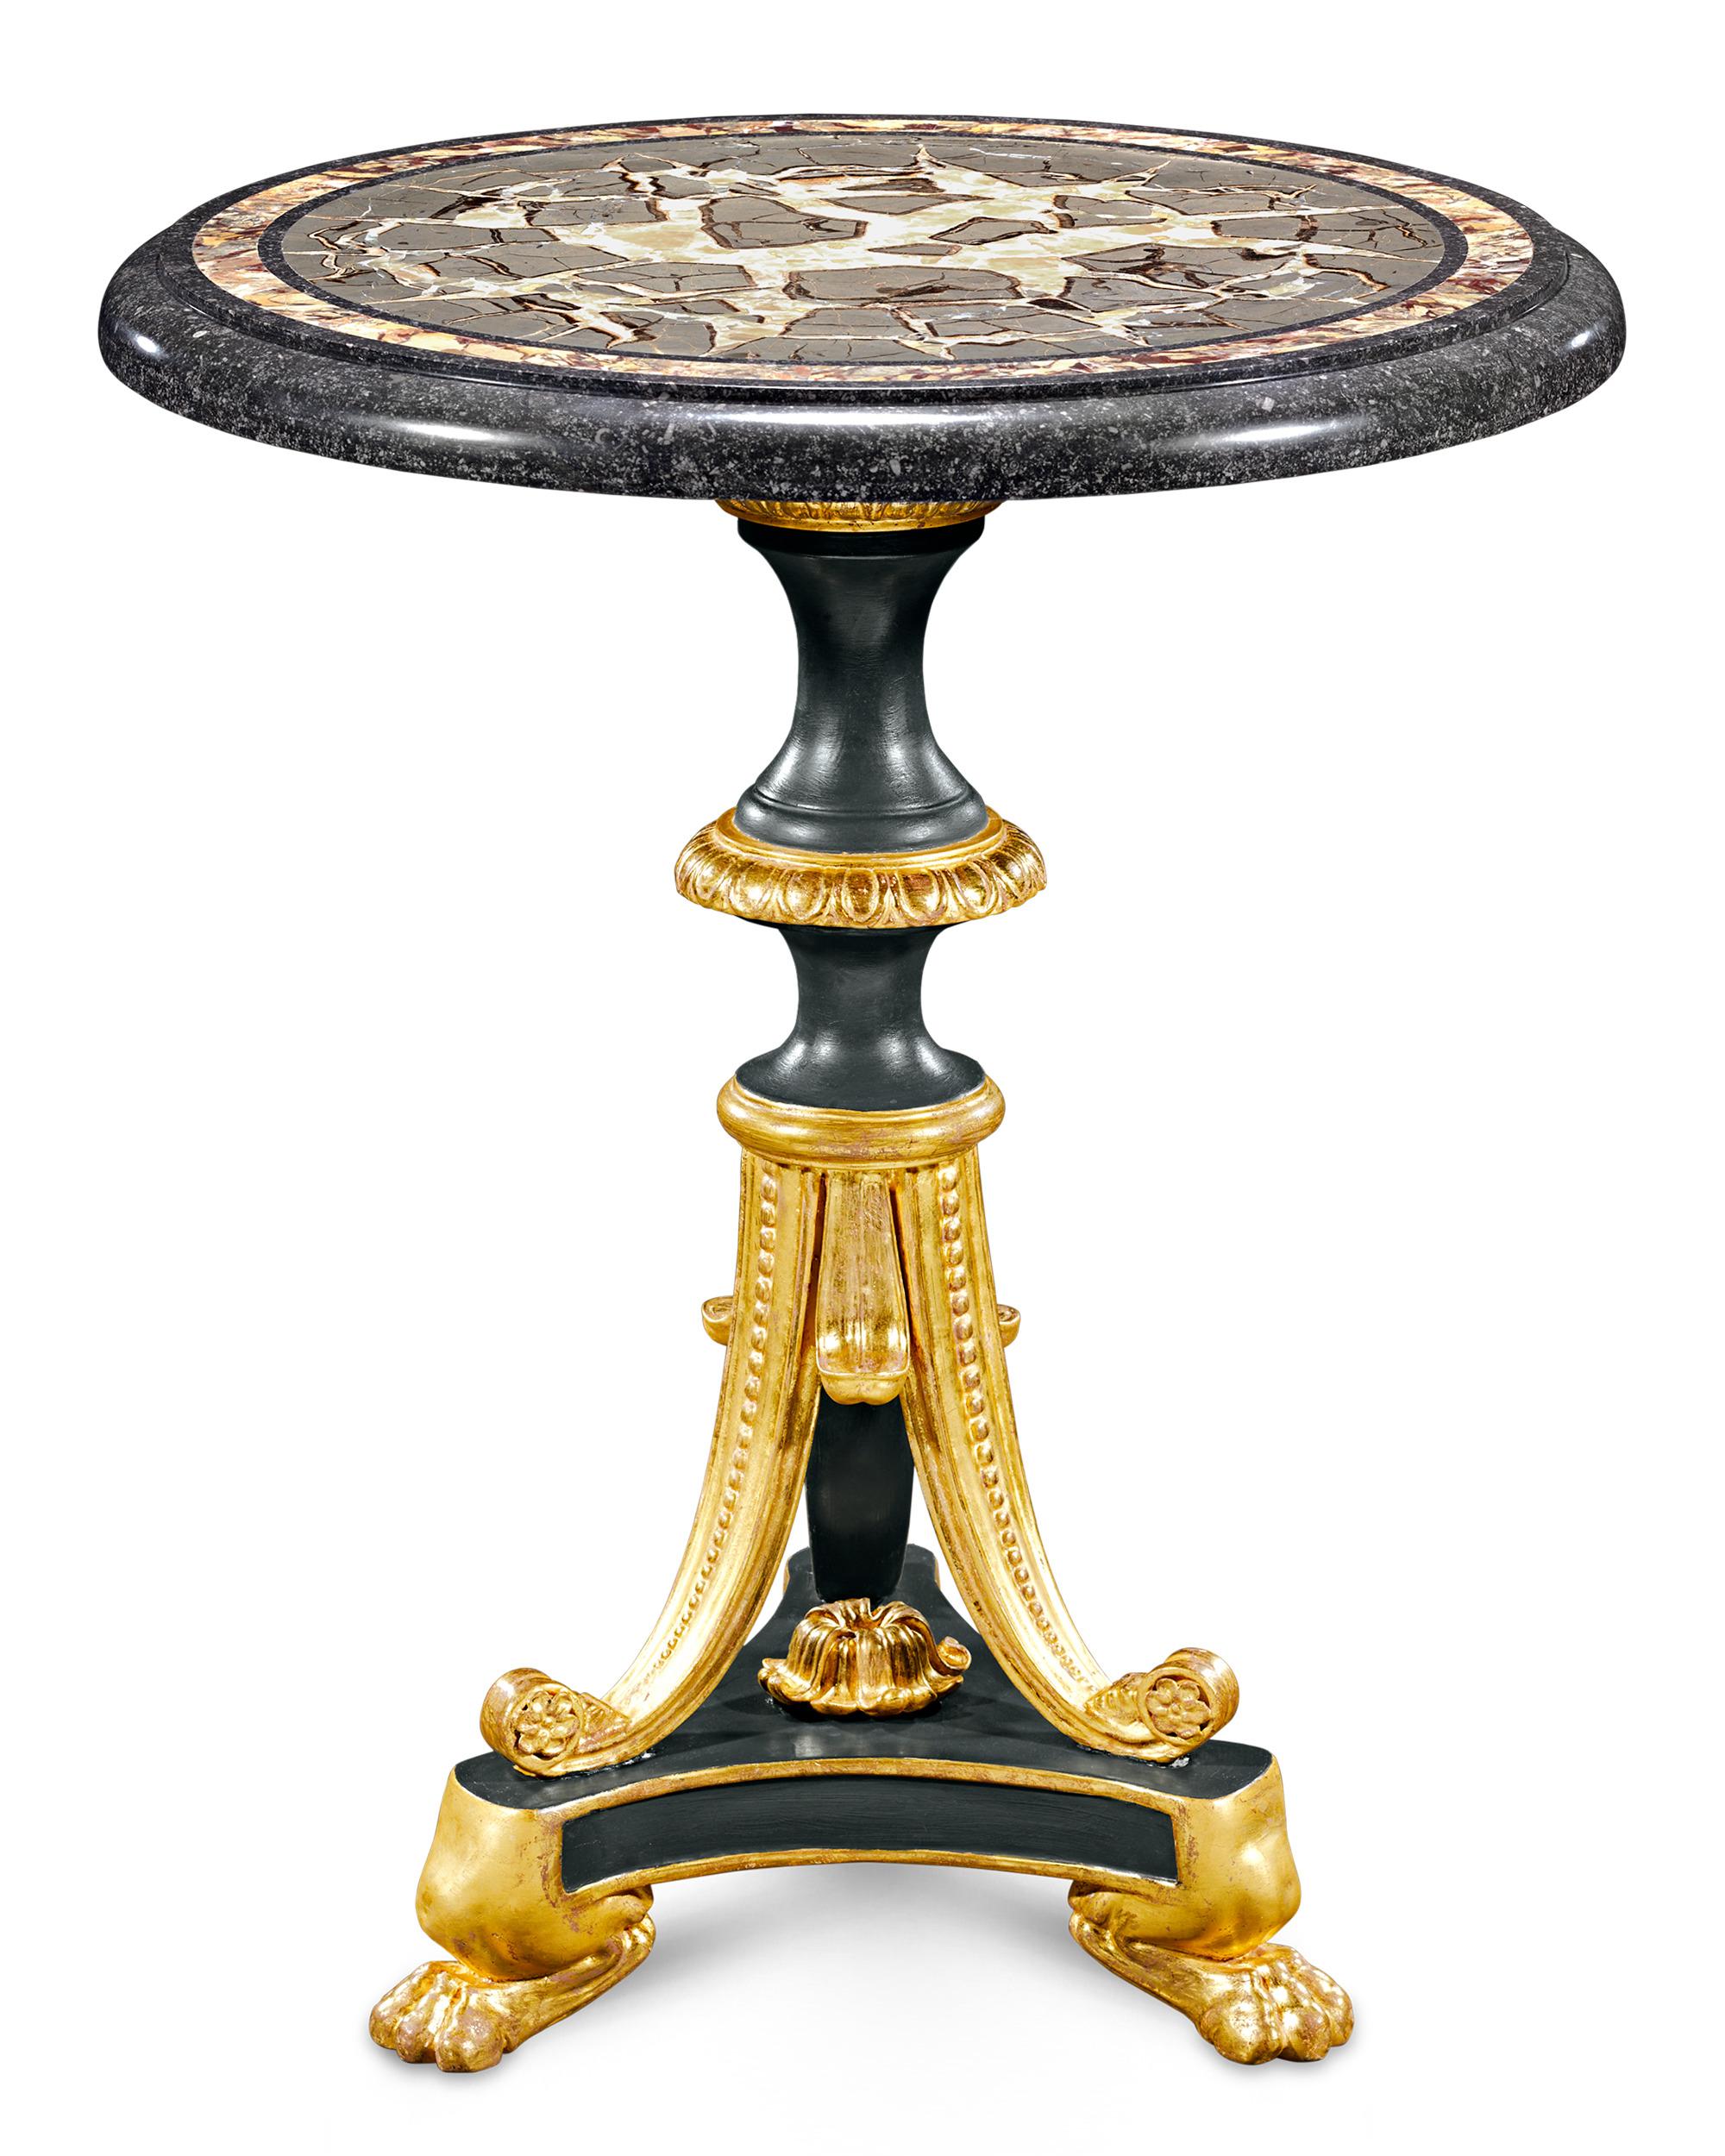 English Turtle Stone and Royal Sarracolin Marble Parcel Gilt Table